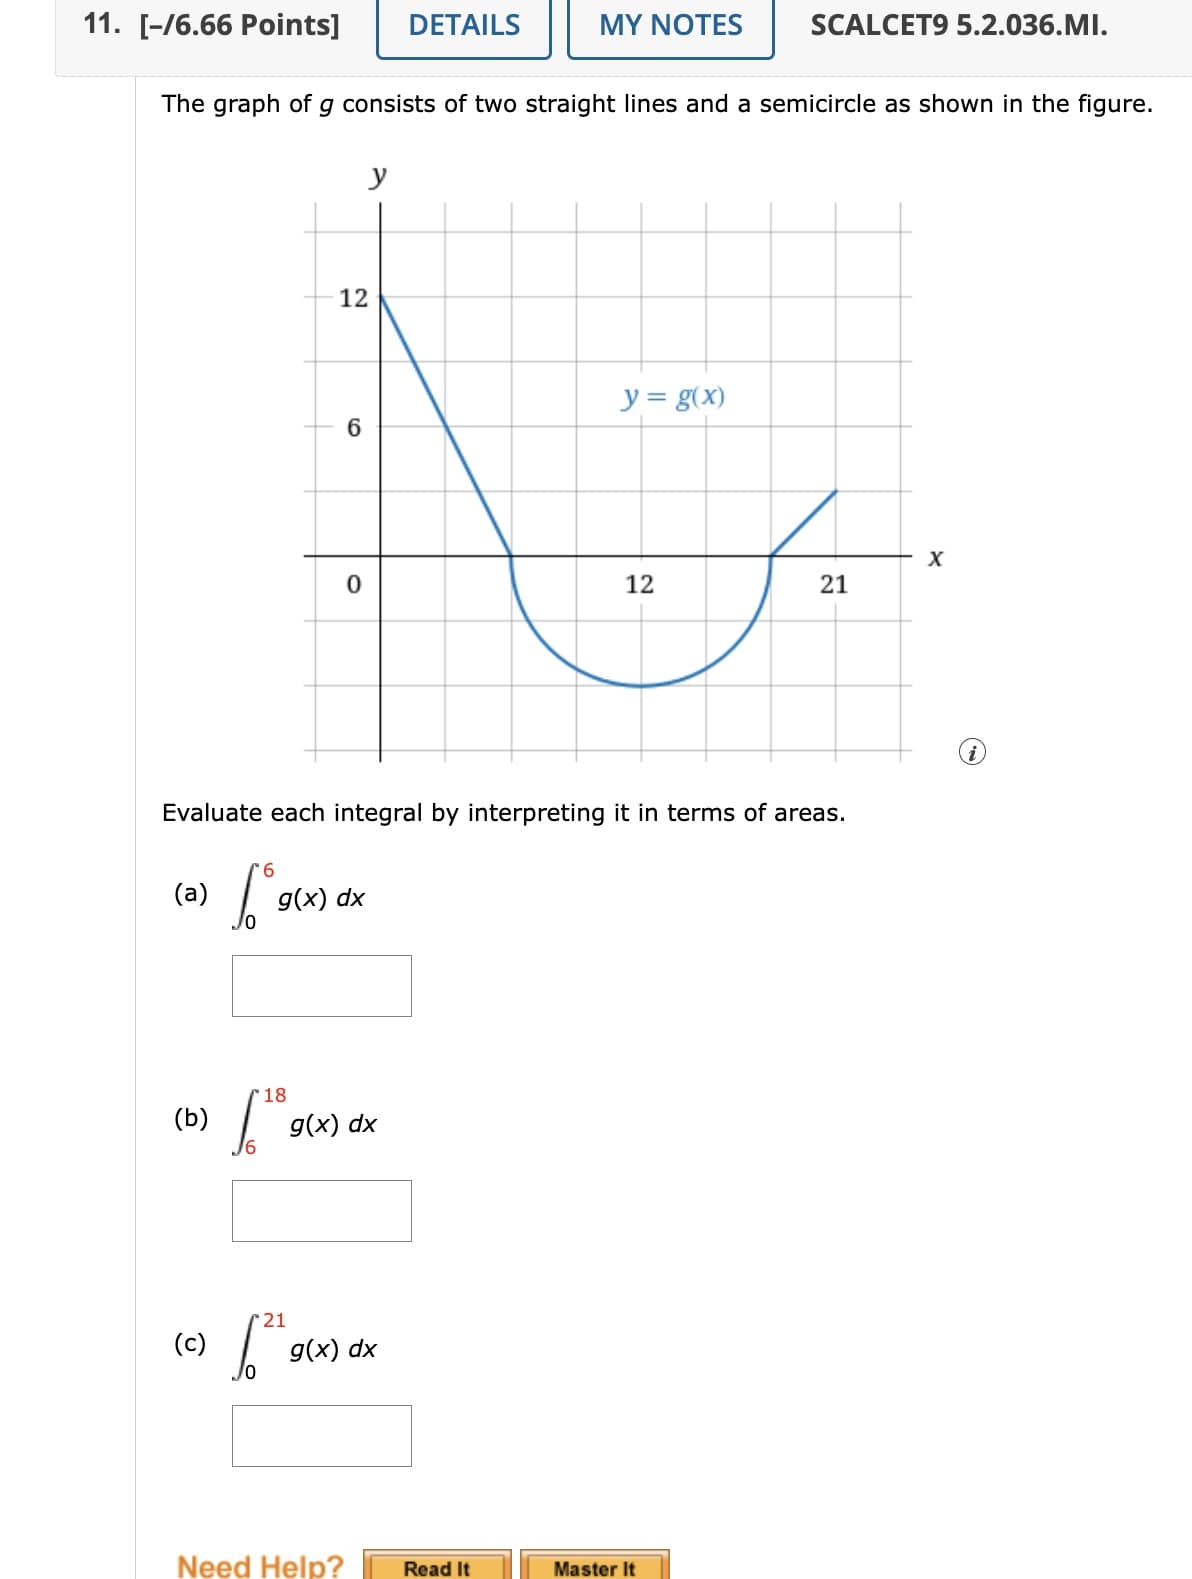 11. [-/6.66 Points]
DETAILS
MY NOTES
SCALCET9 5.2.036.MI.
The graph of g consists of two straight lines and a semicircle as shown in the figure.
12
6
y = g(x)
0
12
x
21
21
Evaluate each integral by interpreting it in terms of areas.
(a)
6
g(x) dx
(b)
(c)
18
g(x) dx
21
g(x) dx
Need Help?
Read It
Master It